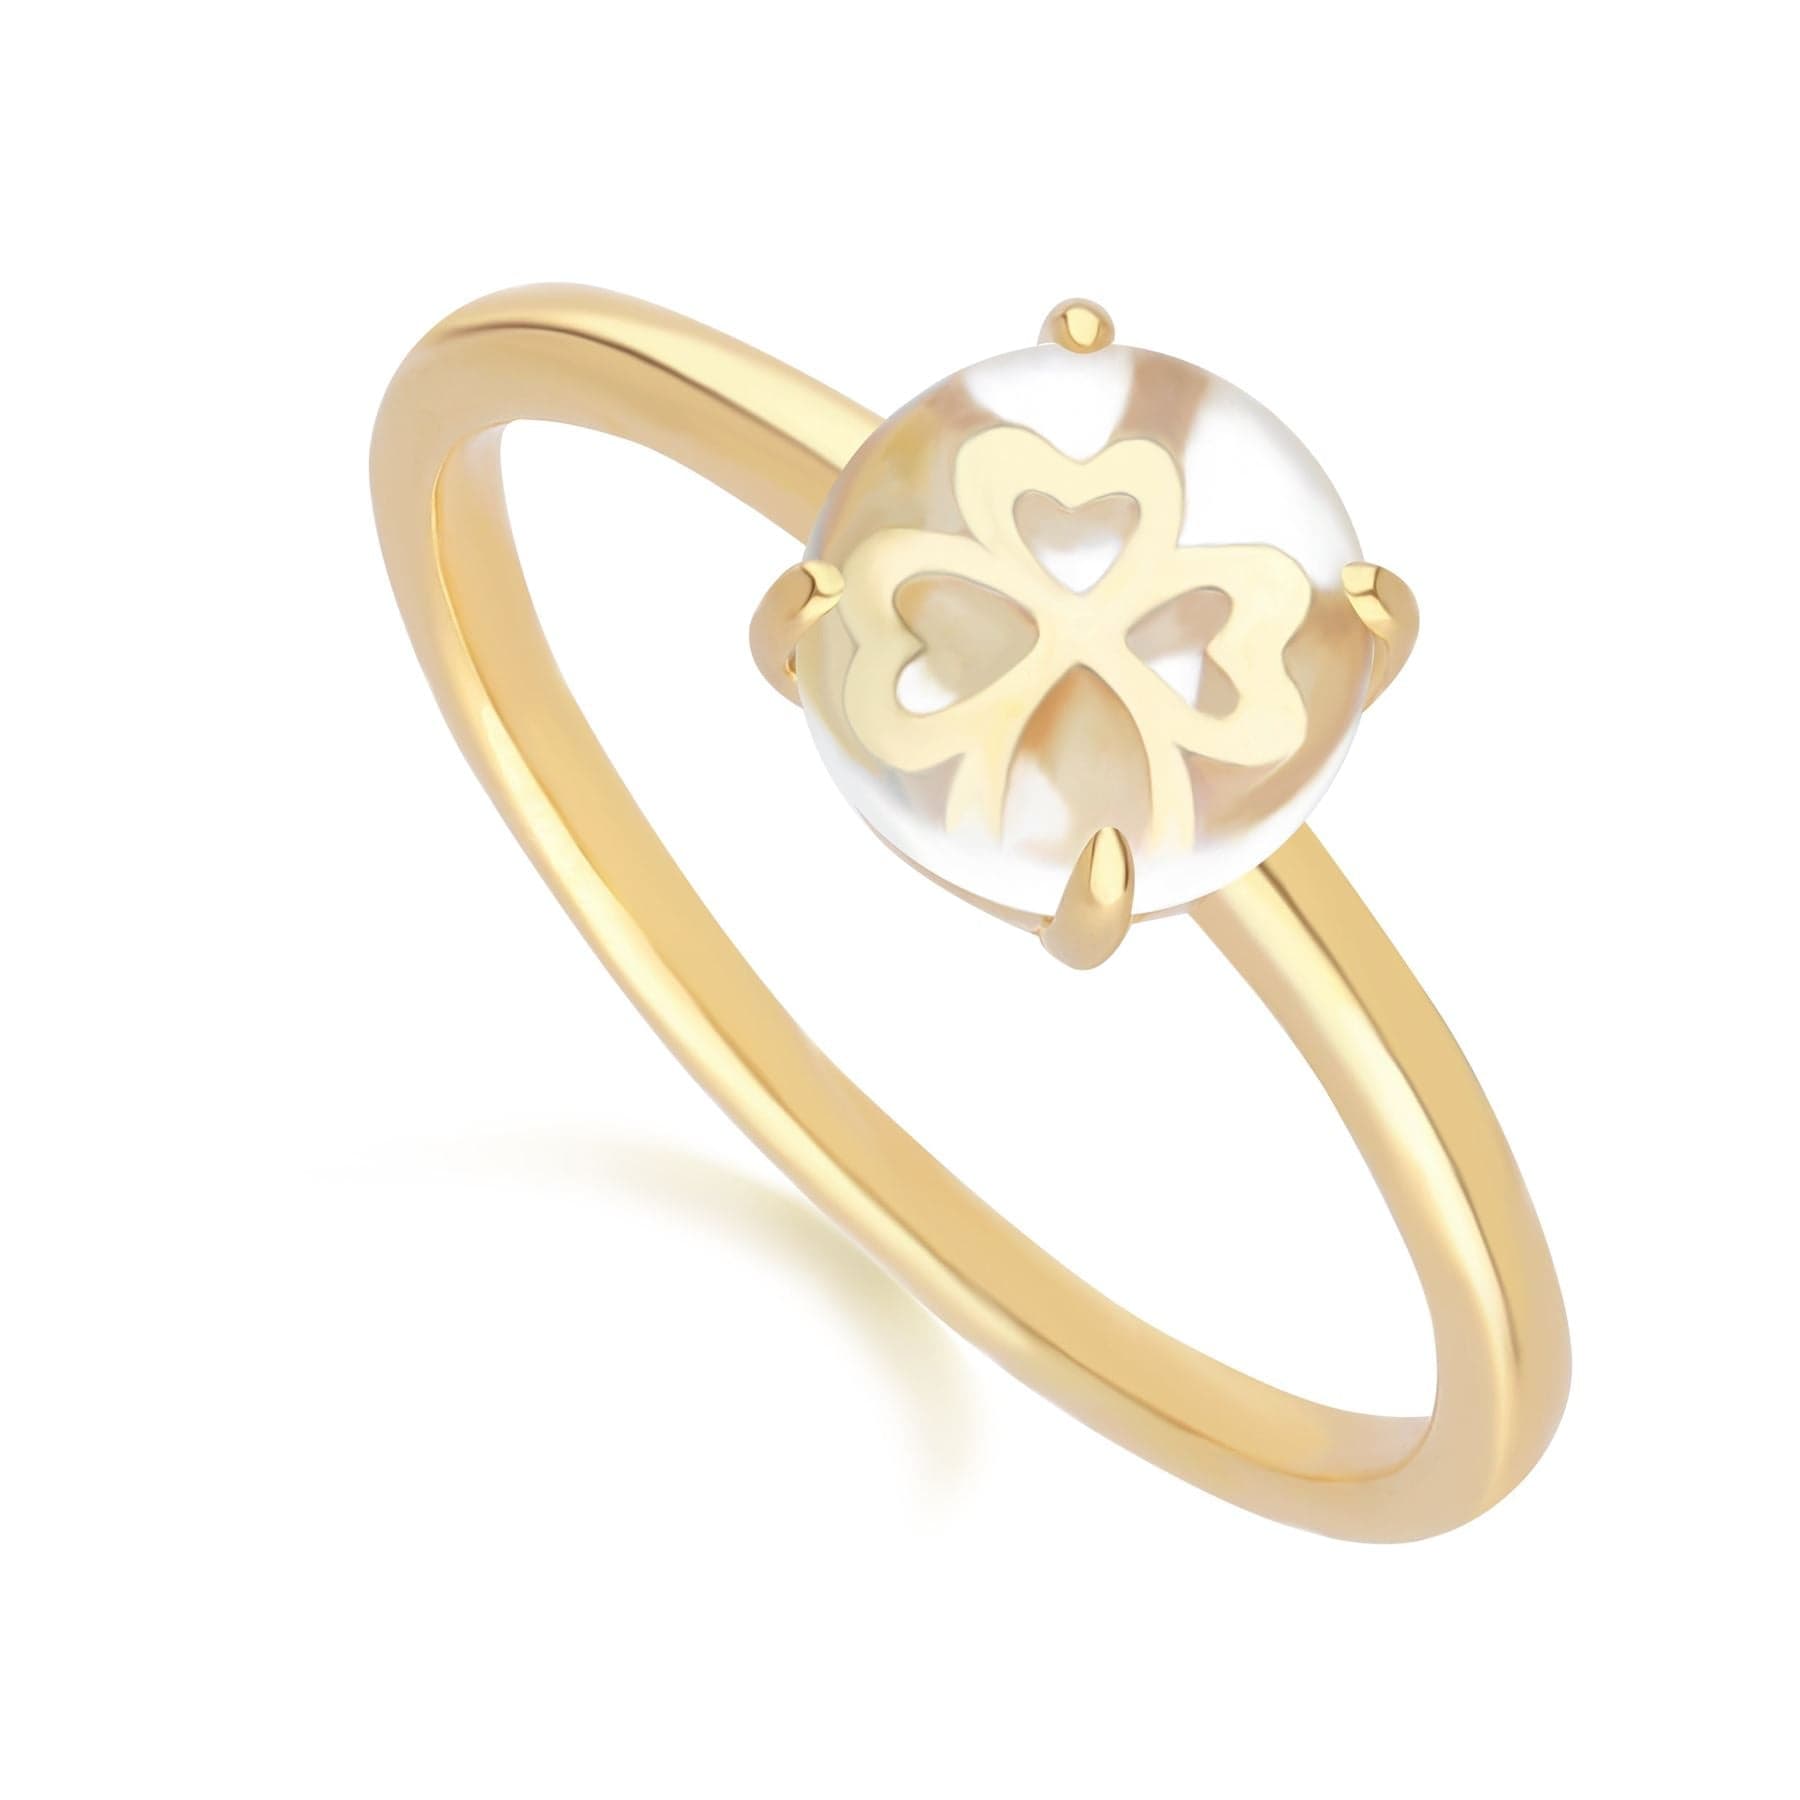 Gardenia Rock Crystal Cabochon Ring in Gold Plated Sterling Silver - Gemondo